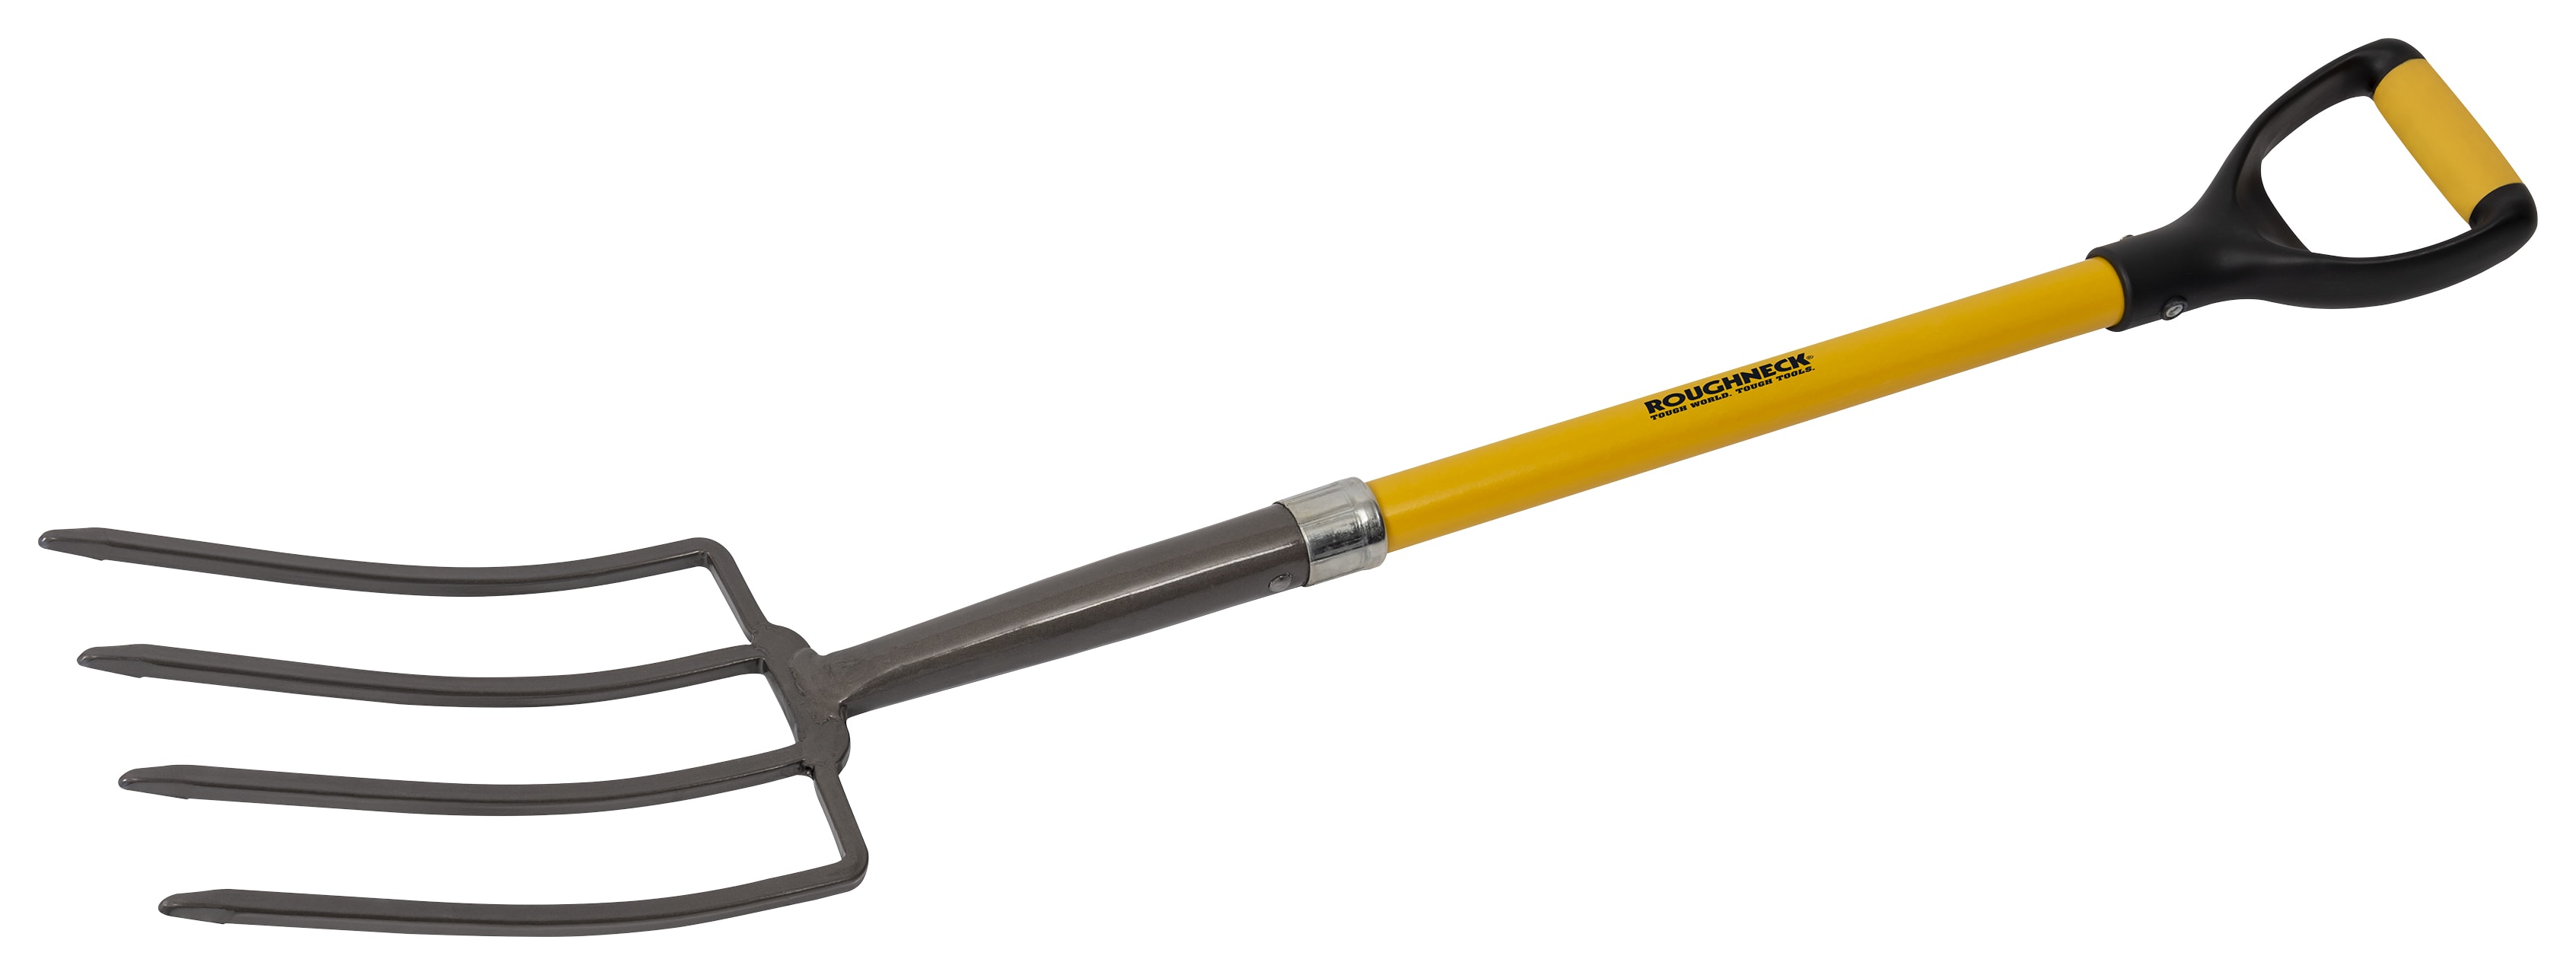 Roughneck® ROU68140 Digging Fork - 180 x 1070mm | Wickes.co.uk